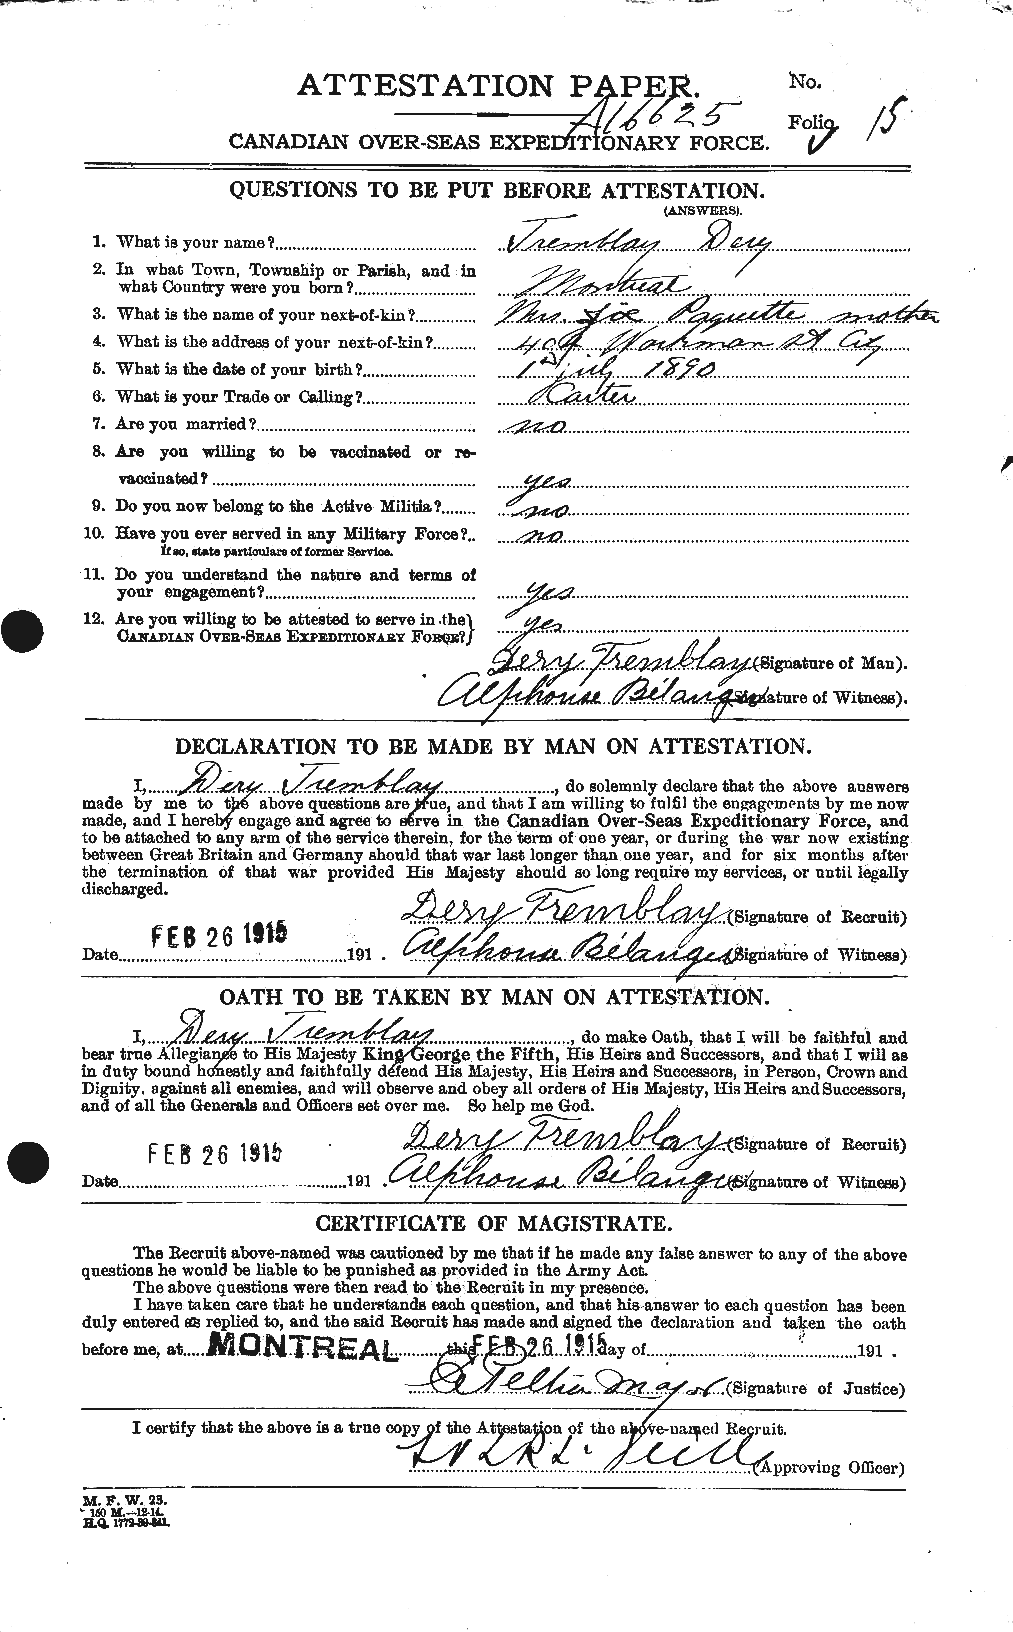 Personnel Records of the First World War - CEF 638993a